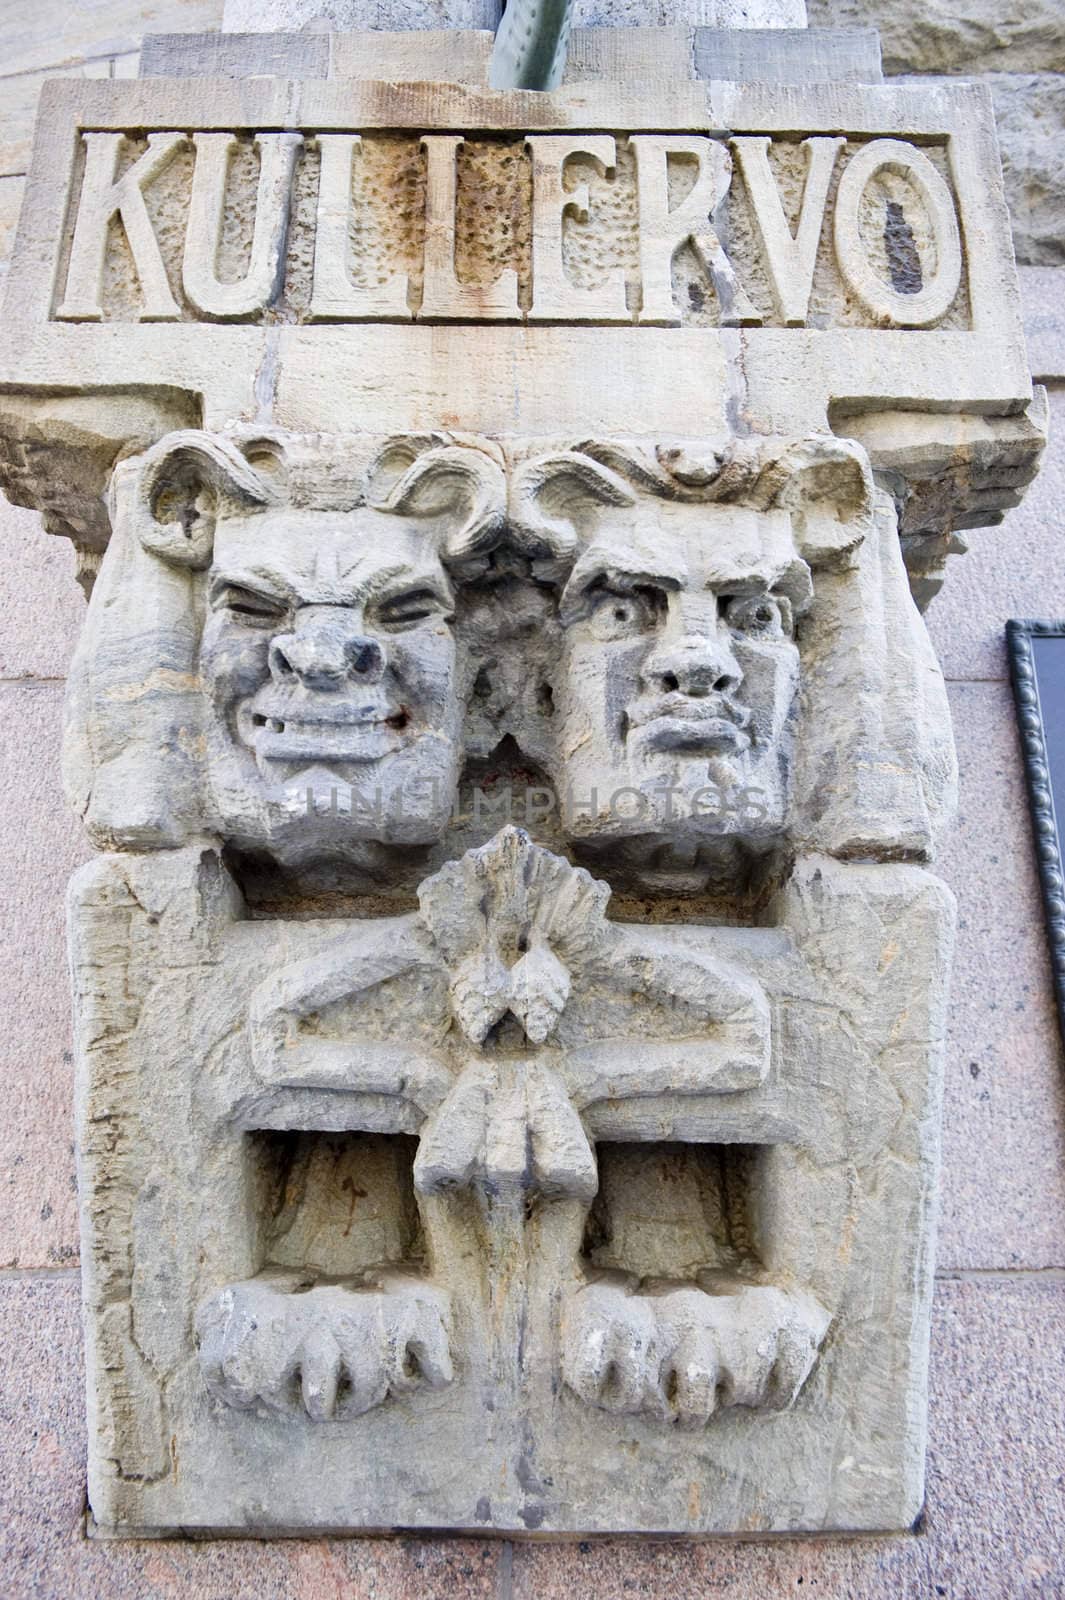 Characters from the Finnish national epos on a building facade in Helsinki.